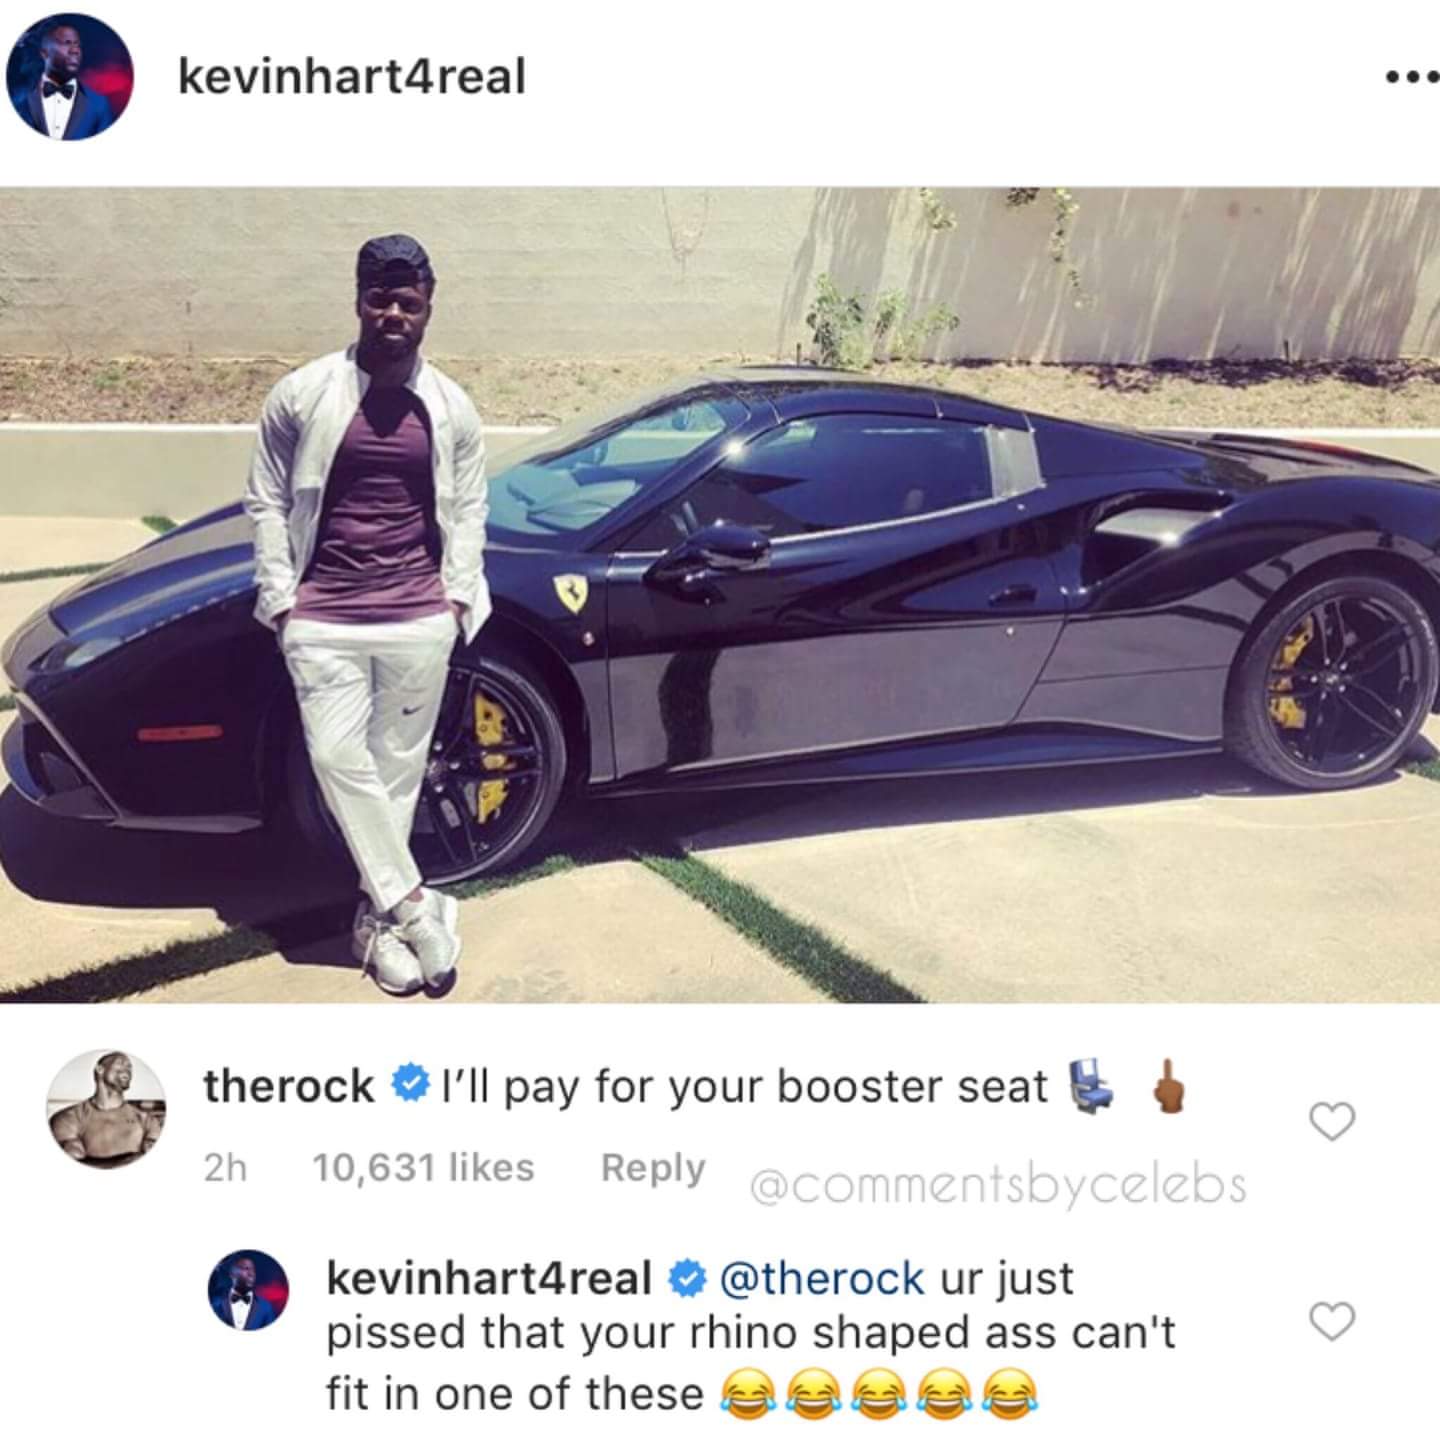 kevin hart the rock car - kevinhart4real therock I'll pay for your booster seat 2h 10,631 a bycelebs kevinhart4real ur just pissed that your rhino shaped ass can't fit in one of these